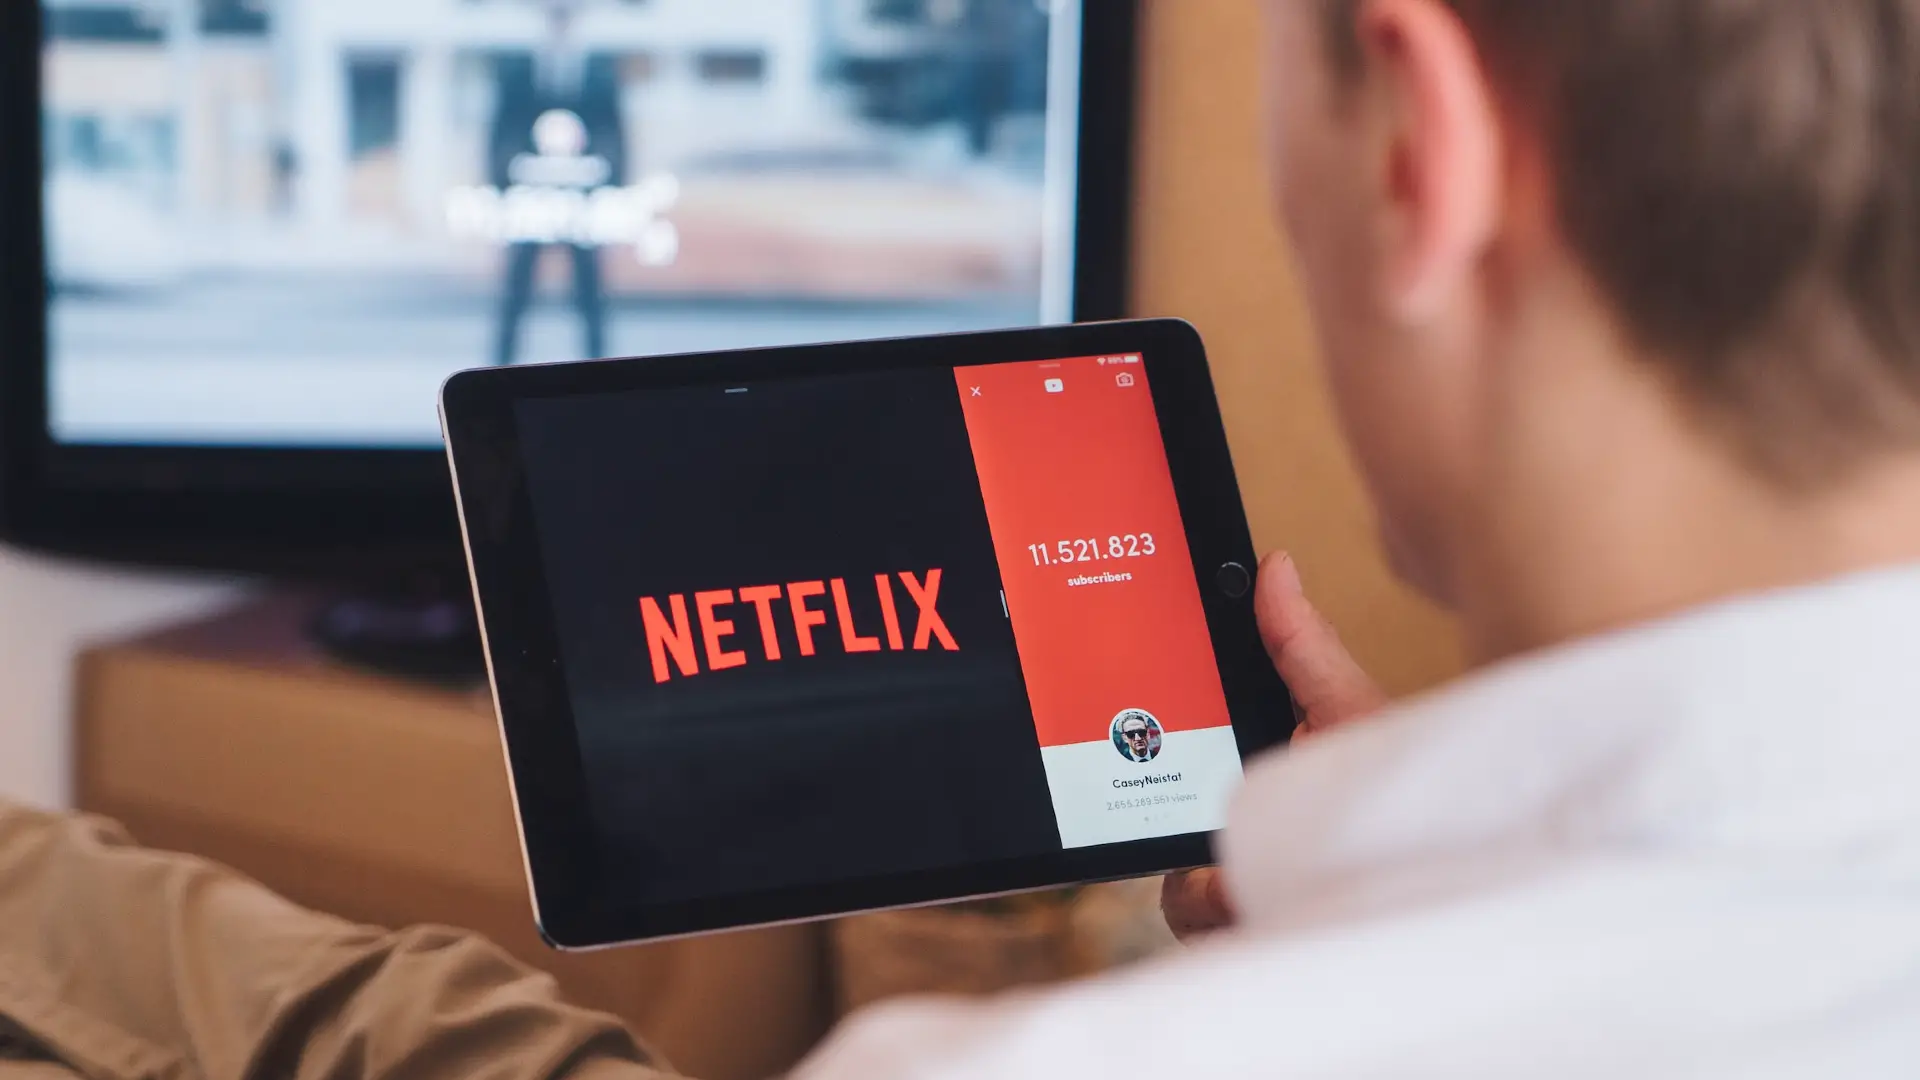 How to make Netflix download faster